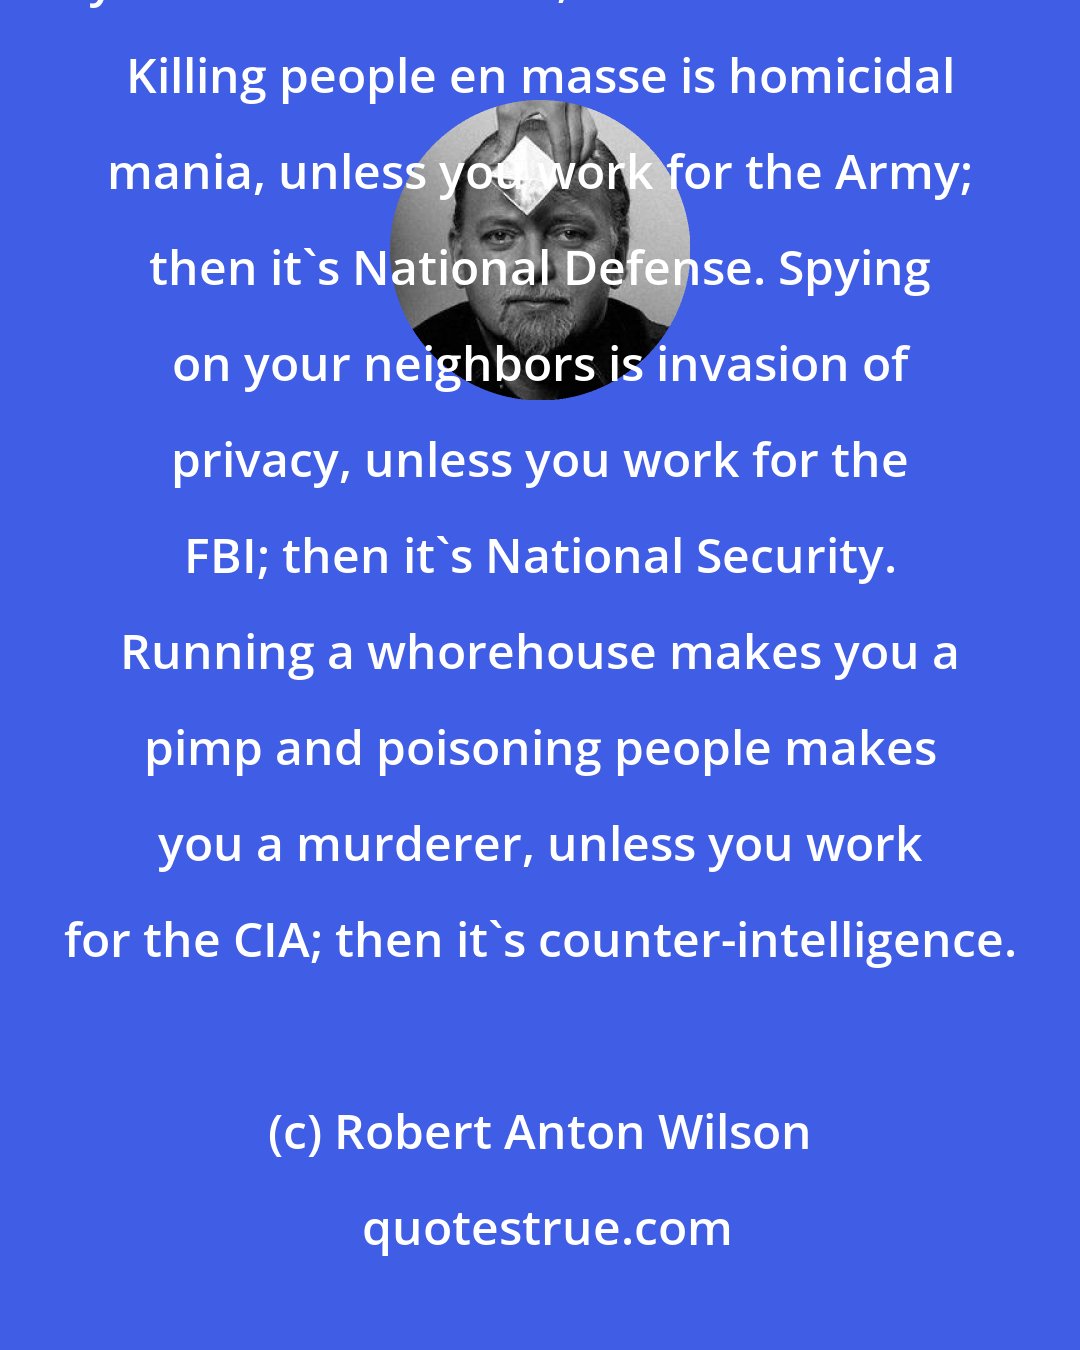 Robert Anton Wilson: Taking somebody's money without permission is stealing, unless you work for the IRS; then it's taxation. Killing people en masse is homicidal mania, unless you work for the Army; then it's National Defense. Spying on your neighbors is invasion of privacy, unless you work for the FBI; then it's National Security. Running a whorehouse makes you a pimp and poisoning people makes you a murderer, unless you work for the CIA; then it's counter-intelligence.